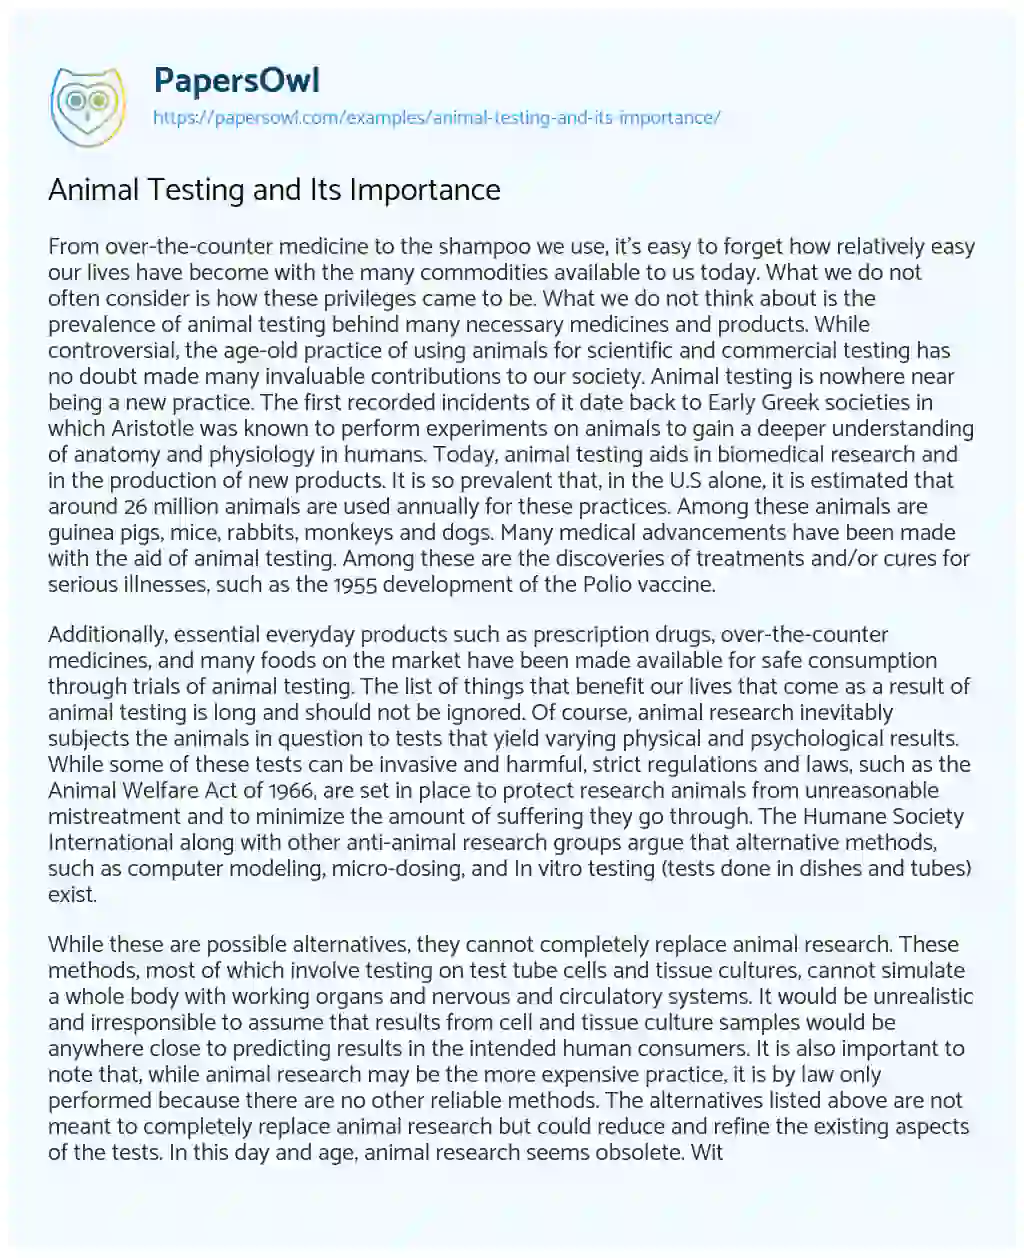 Essay on Animal Testing and its Importance